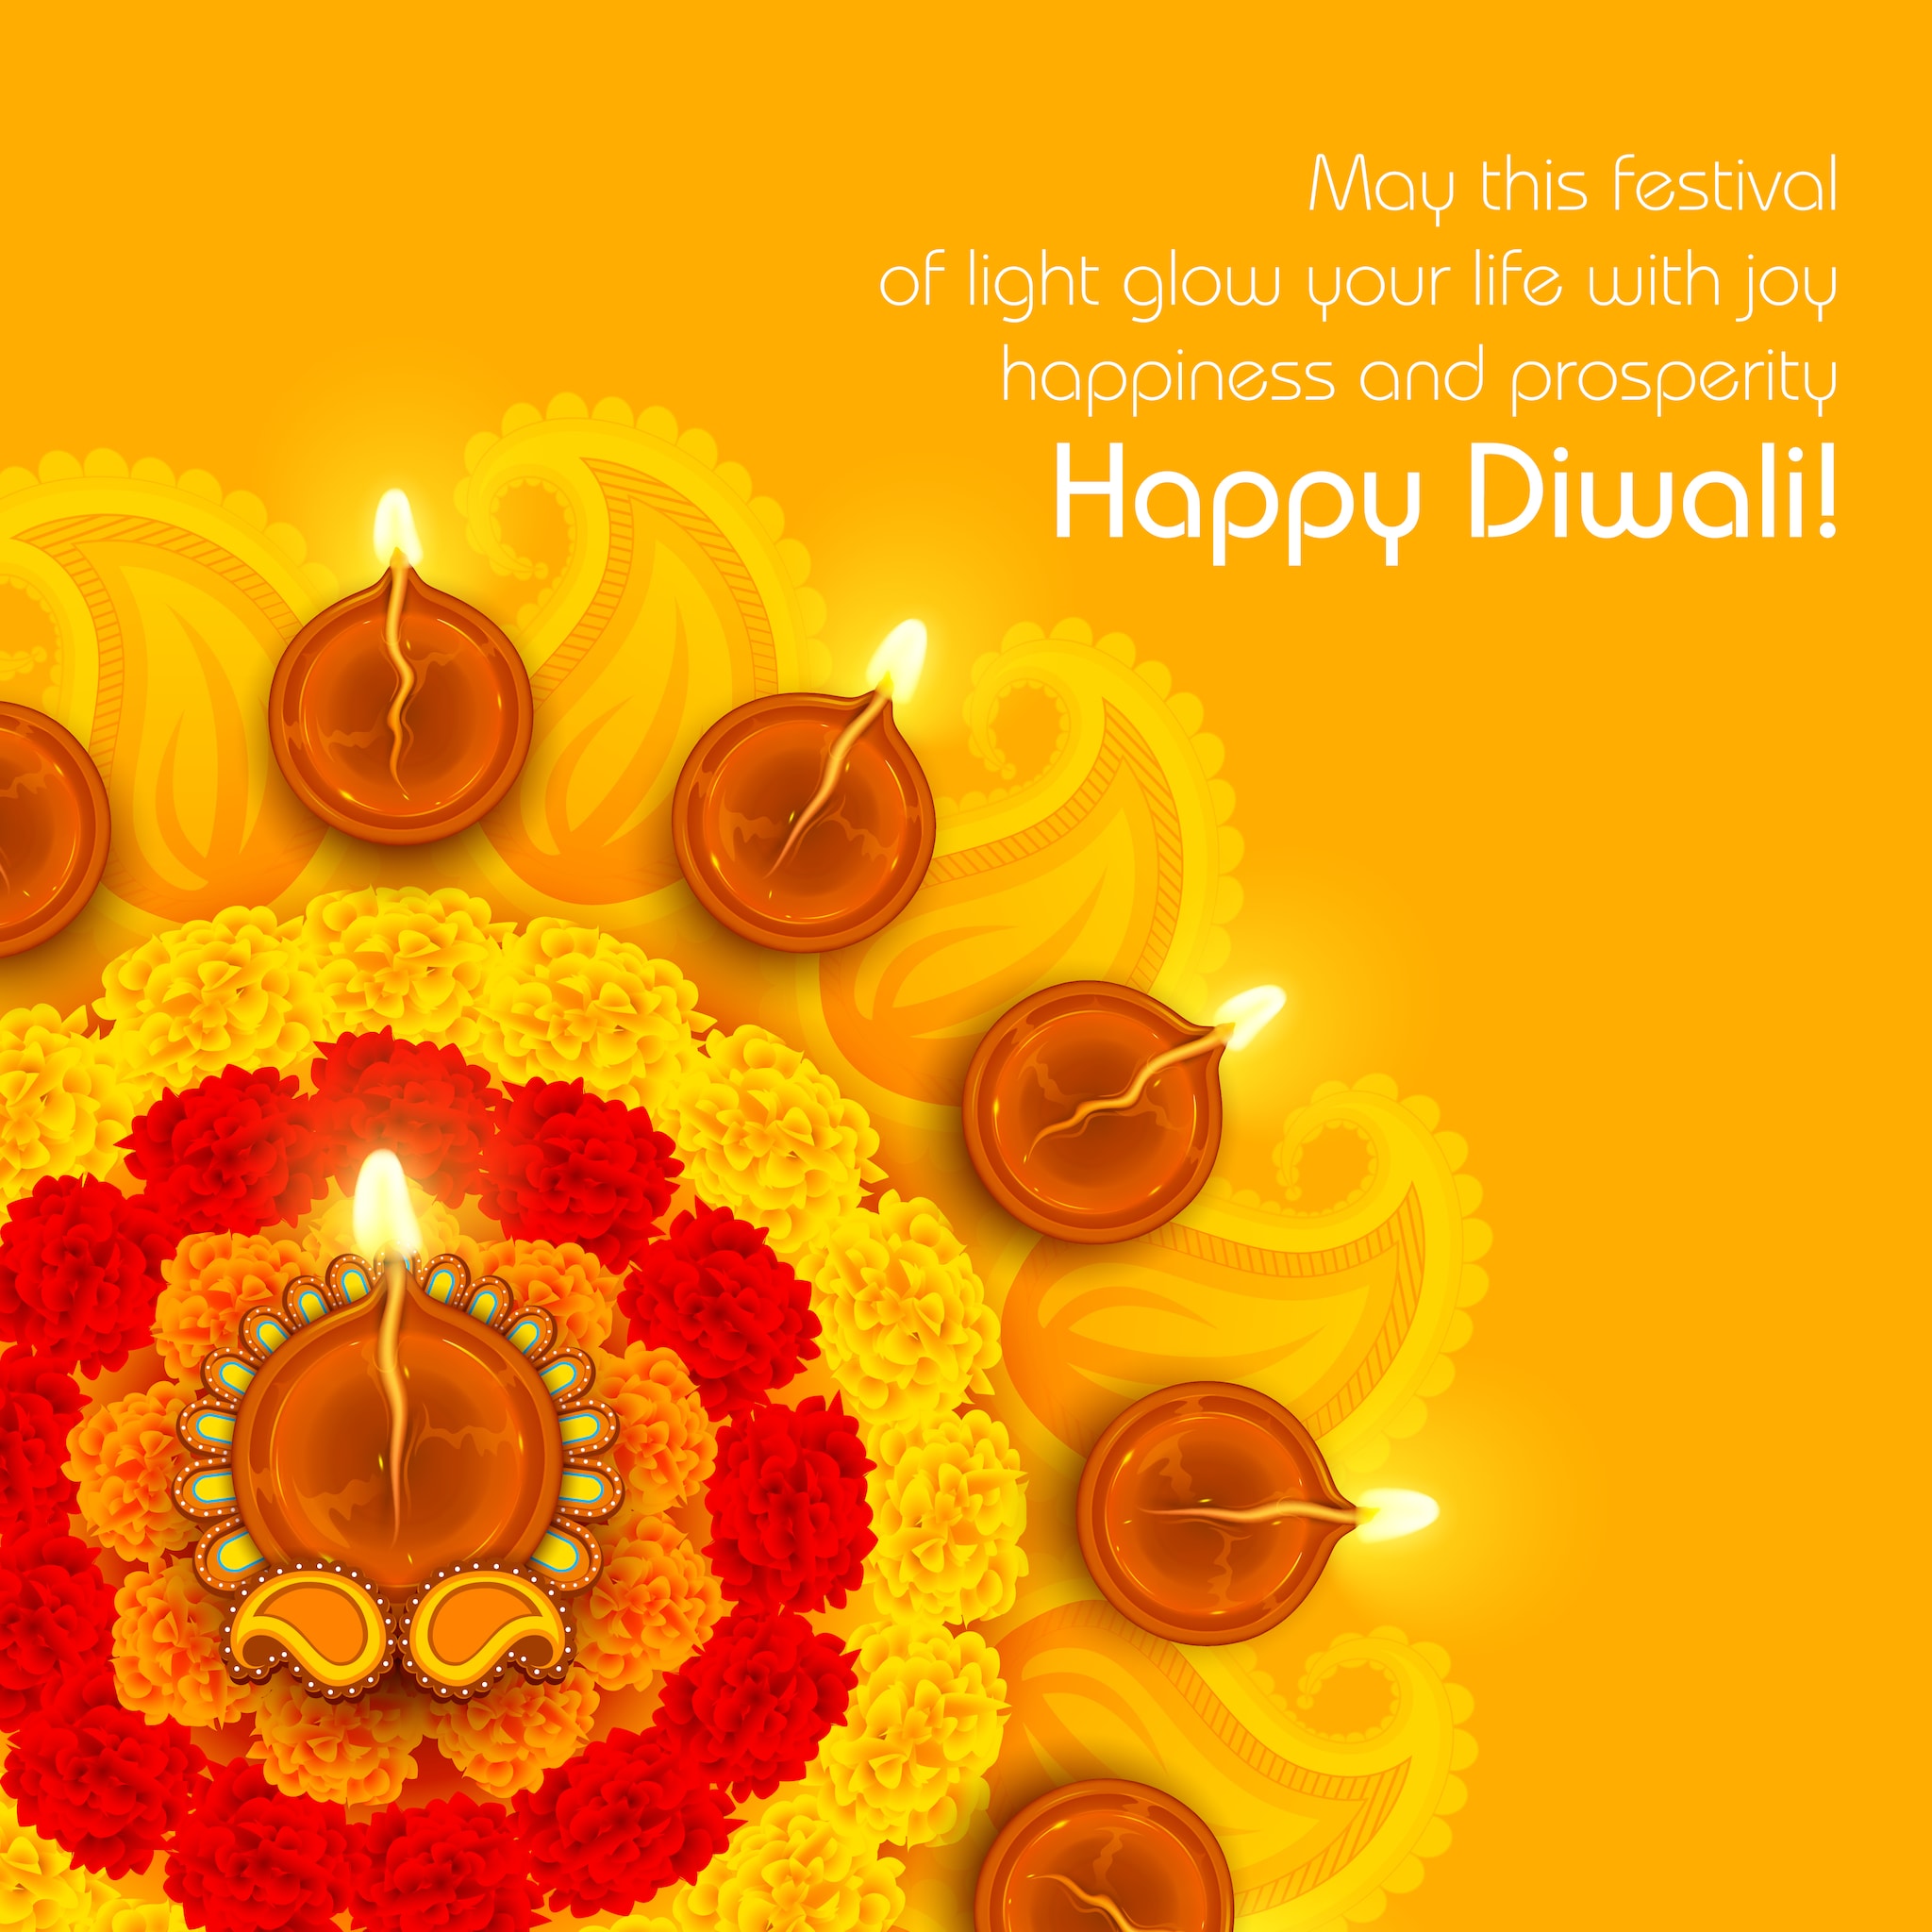 Shubh diwali means happy diwali in the indian languages hindi/marathi. •  wall stickers wallpaper, vector, traditional | myloview.com